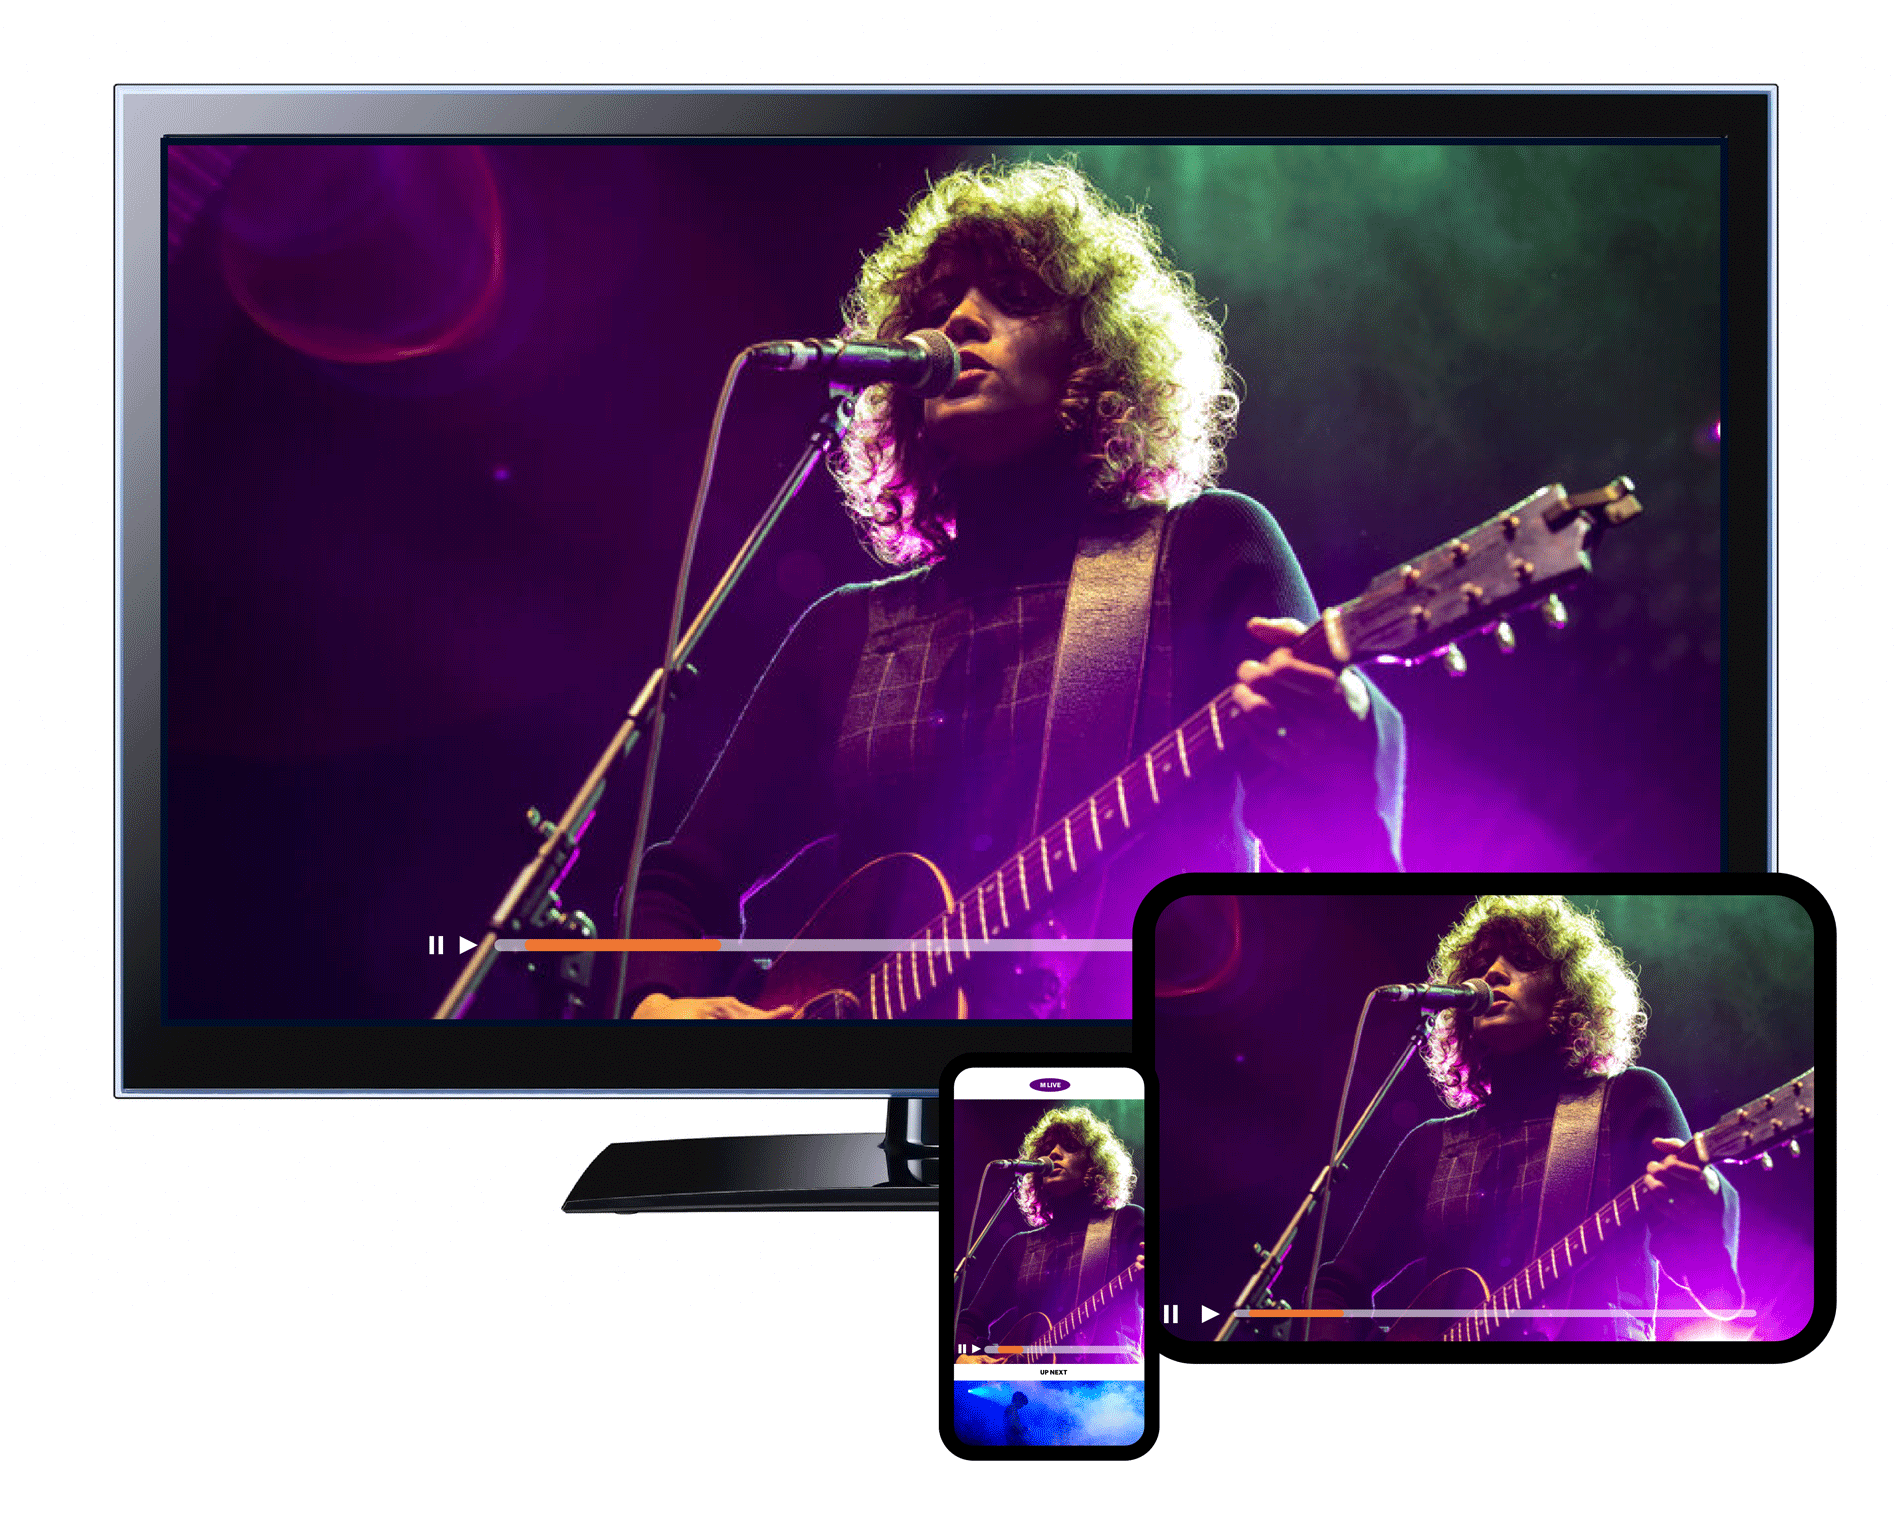 Live video stream events on demand on a smartphone, tablet, and mobile device